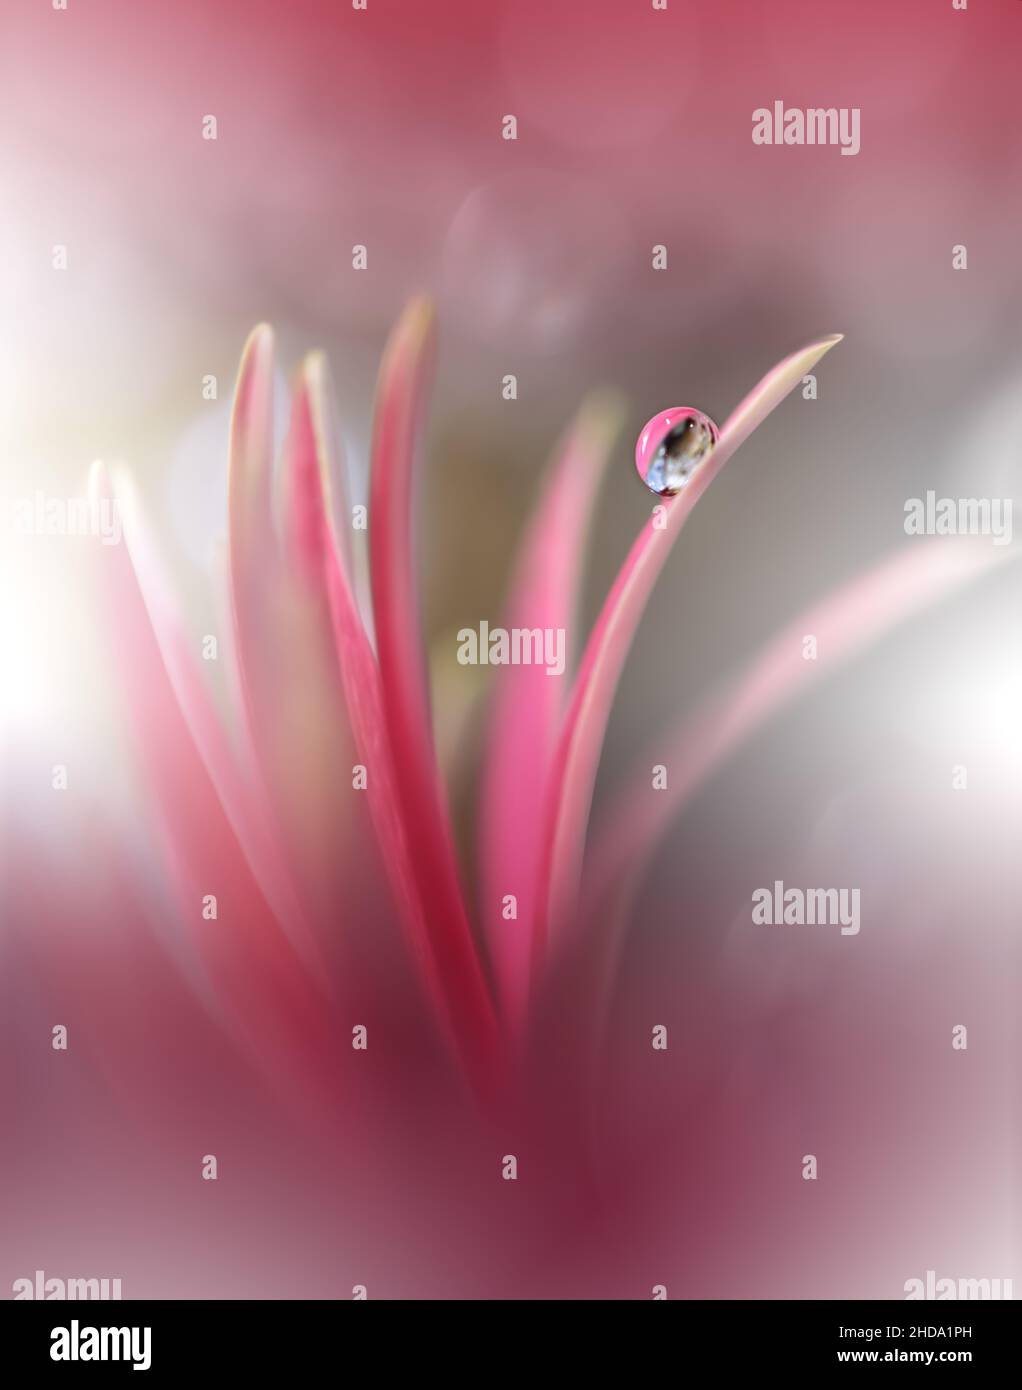 Beautiful Nature Background.Floral Art Design.Abstract Macro Photography.Pink Daisy Flower.Pastel Flowers.Violet Background.Creative Artistic Drop. Stock Photo